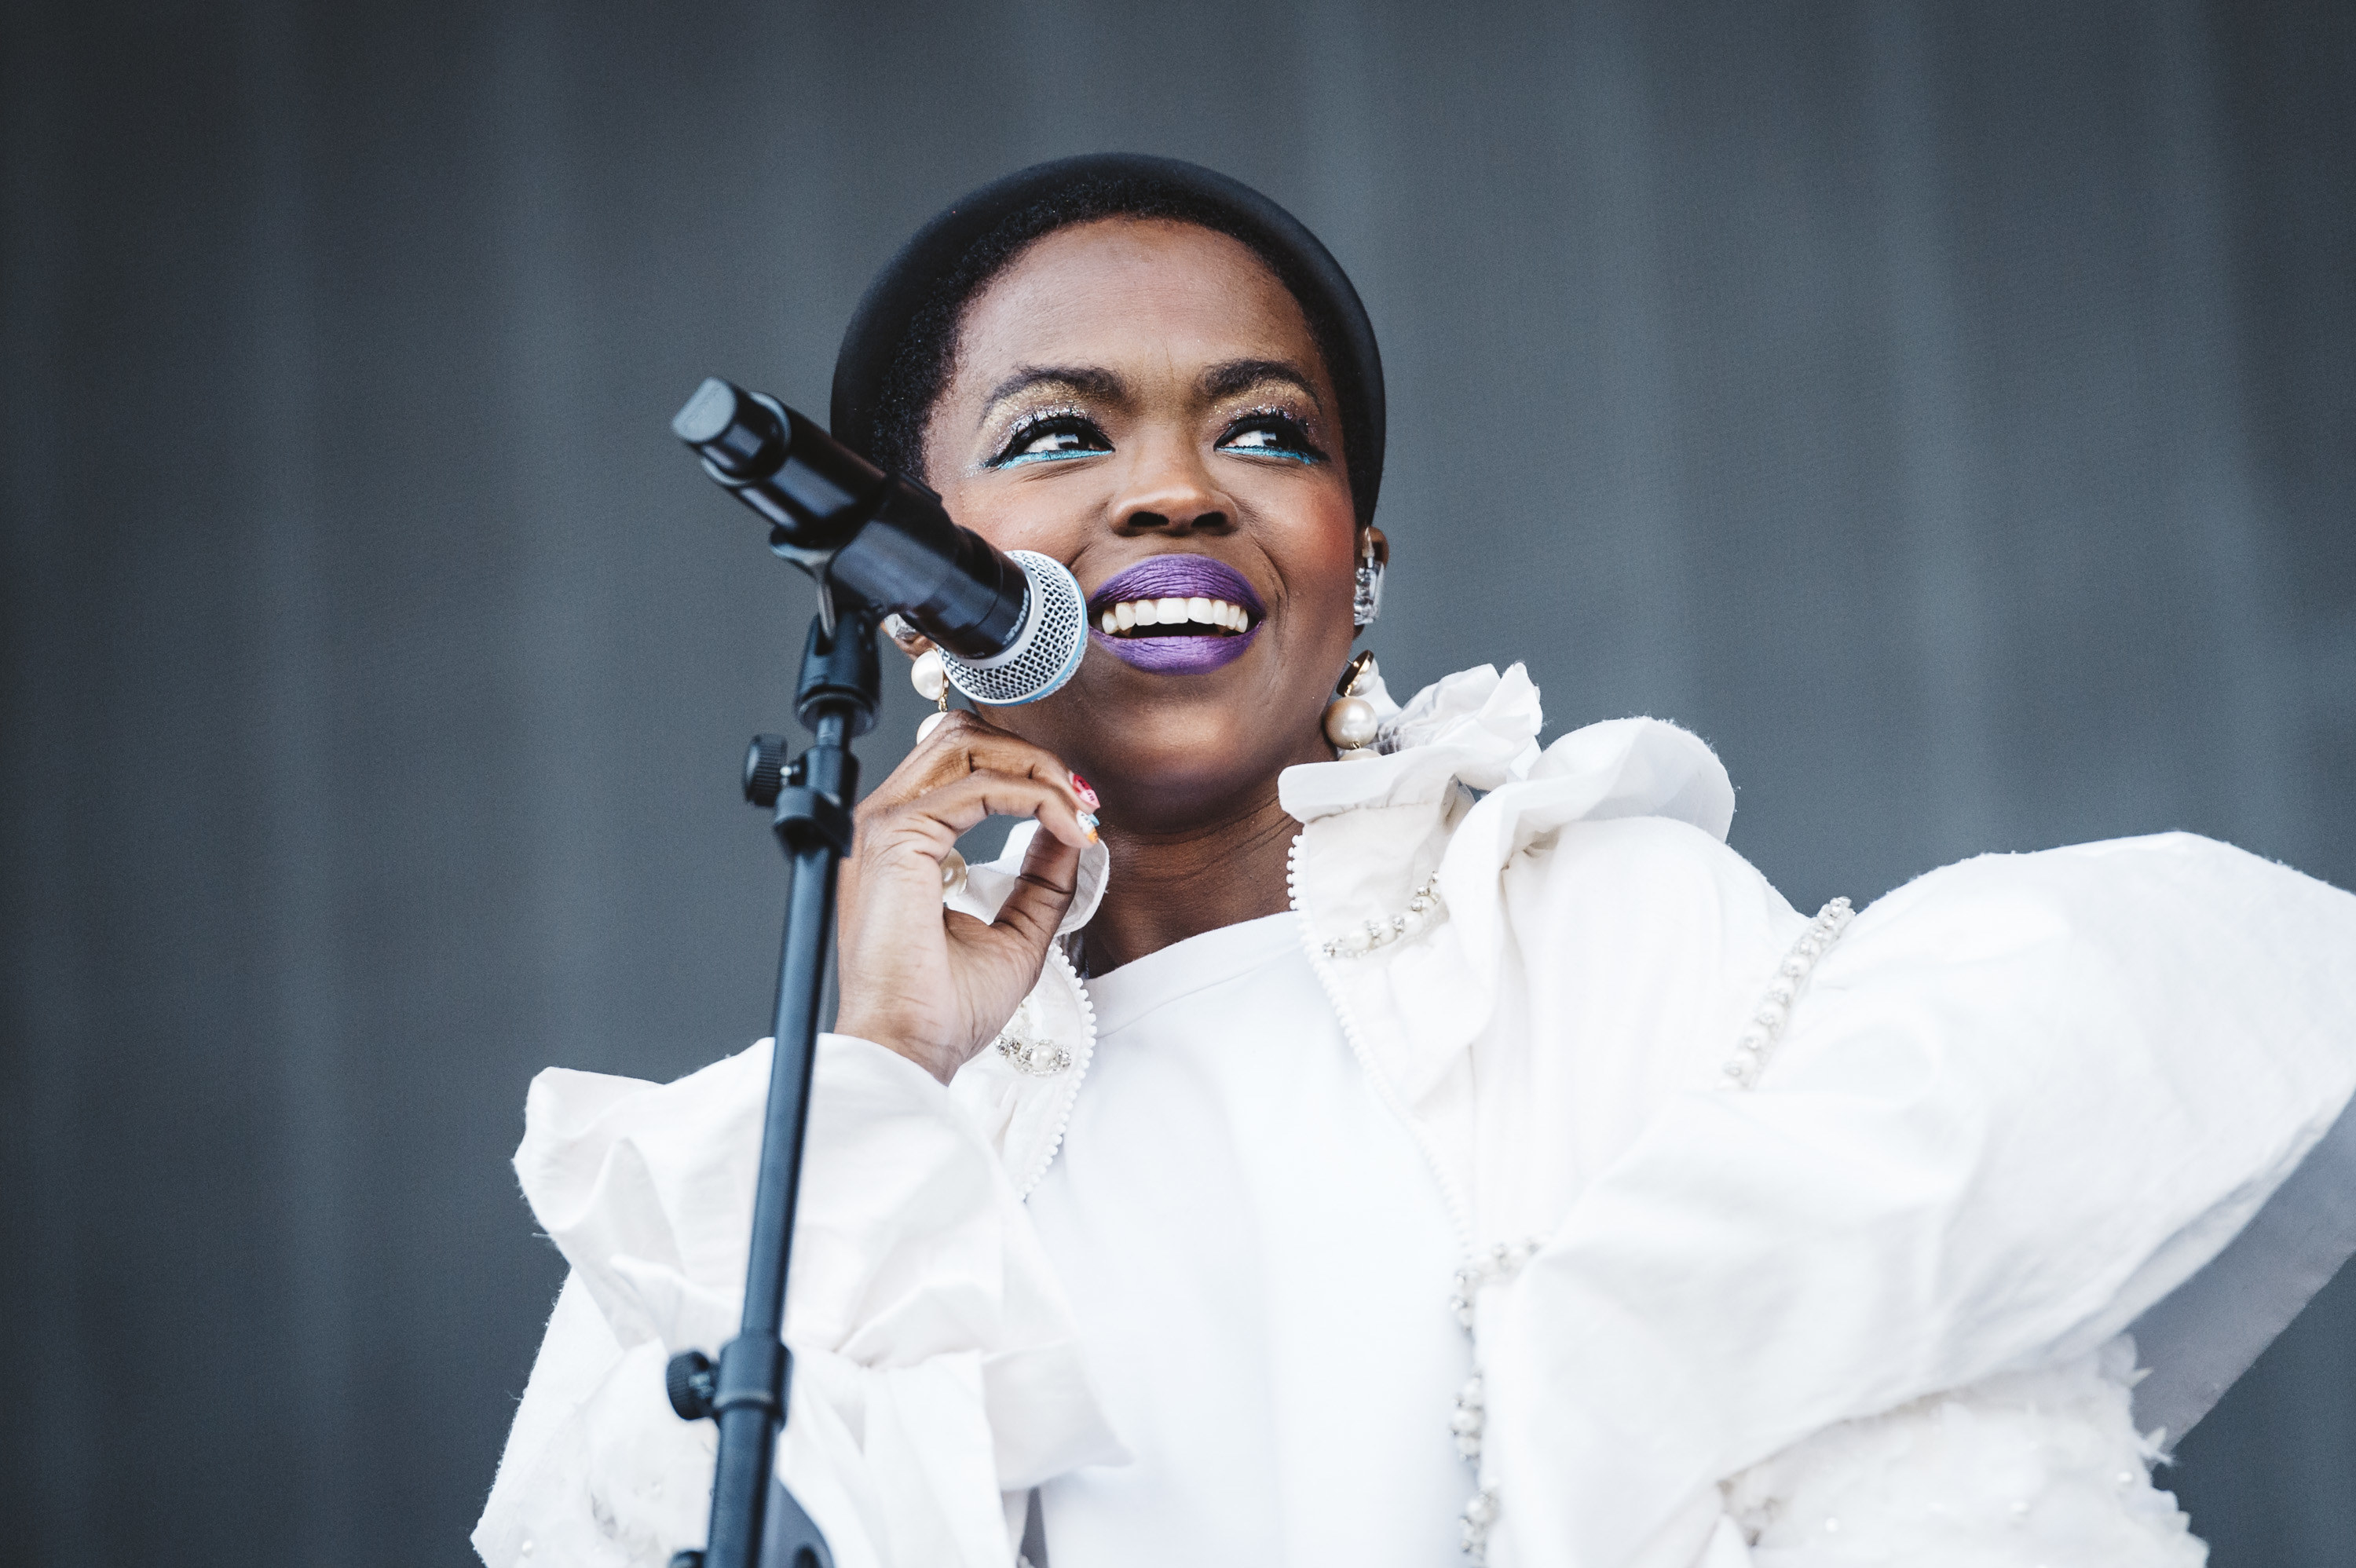 Lauryn Hill performs at the Madcool Festival in Madrid on July 11, 2019